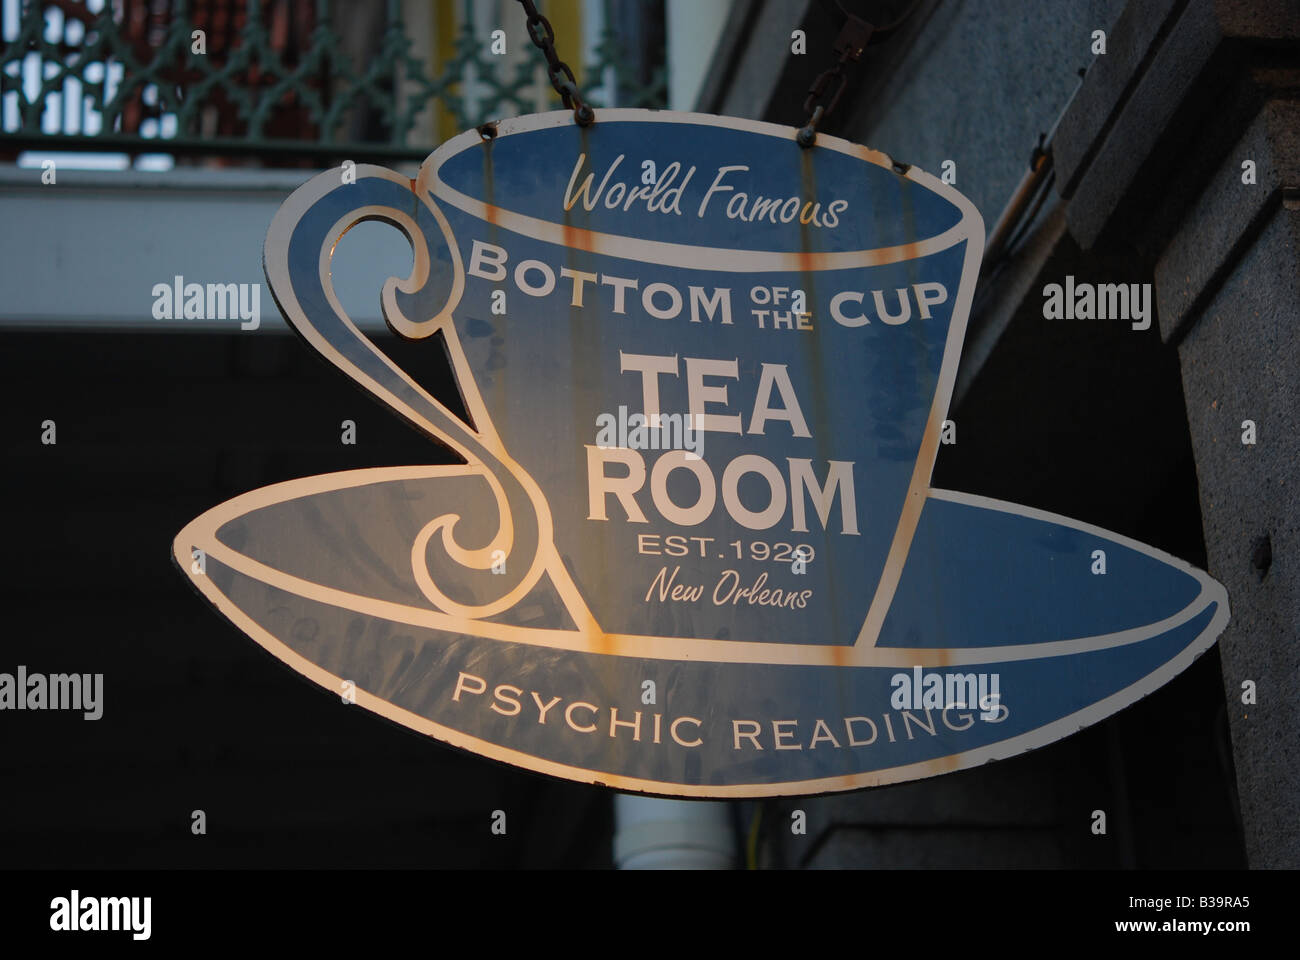 Bottom of the Cup Tea Room sign in the French Quarter of New Orleans, Louisiana. Stock Photo